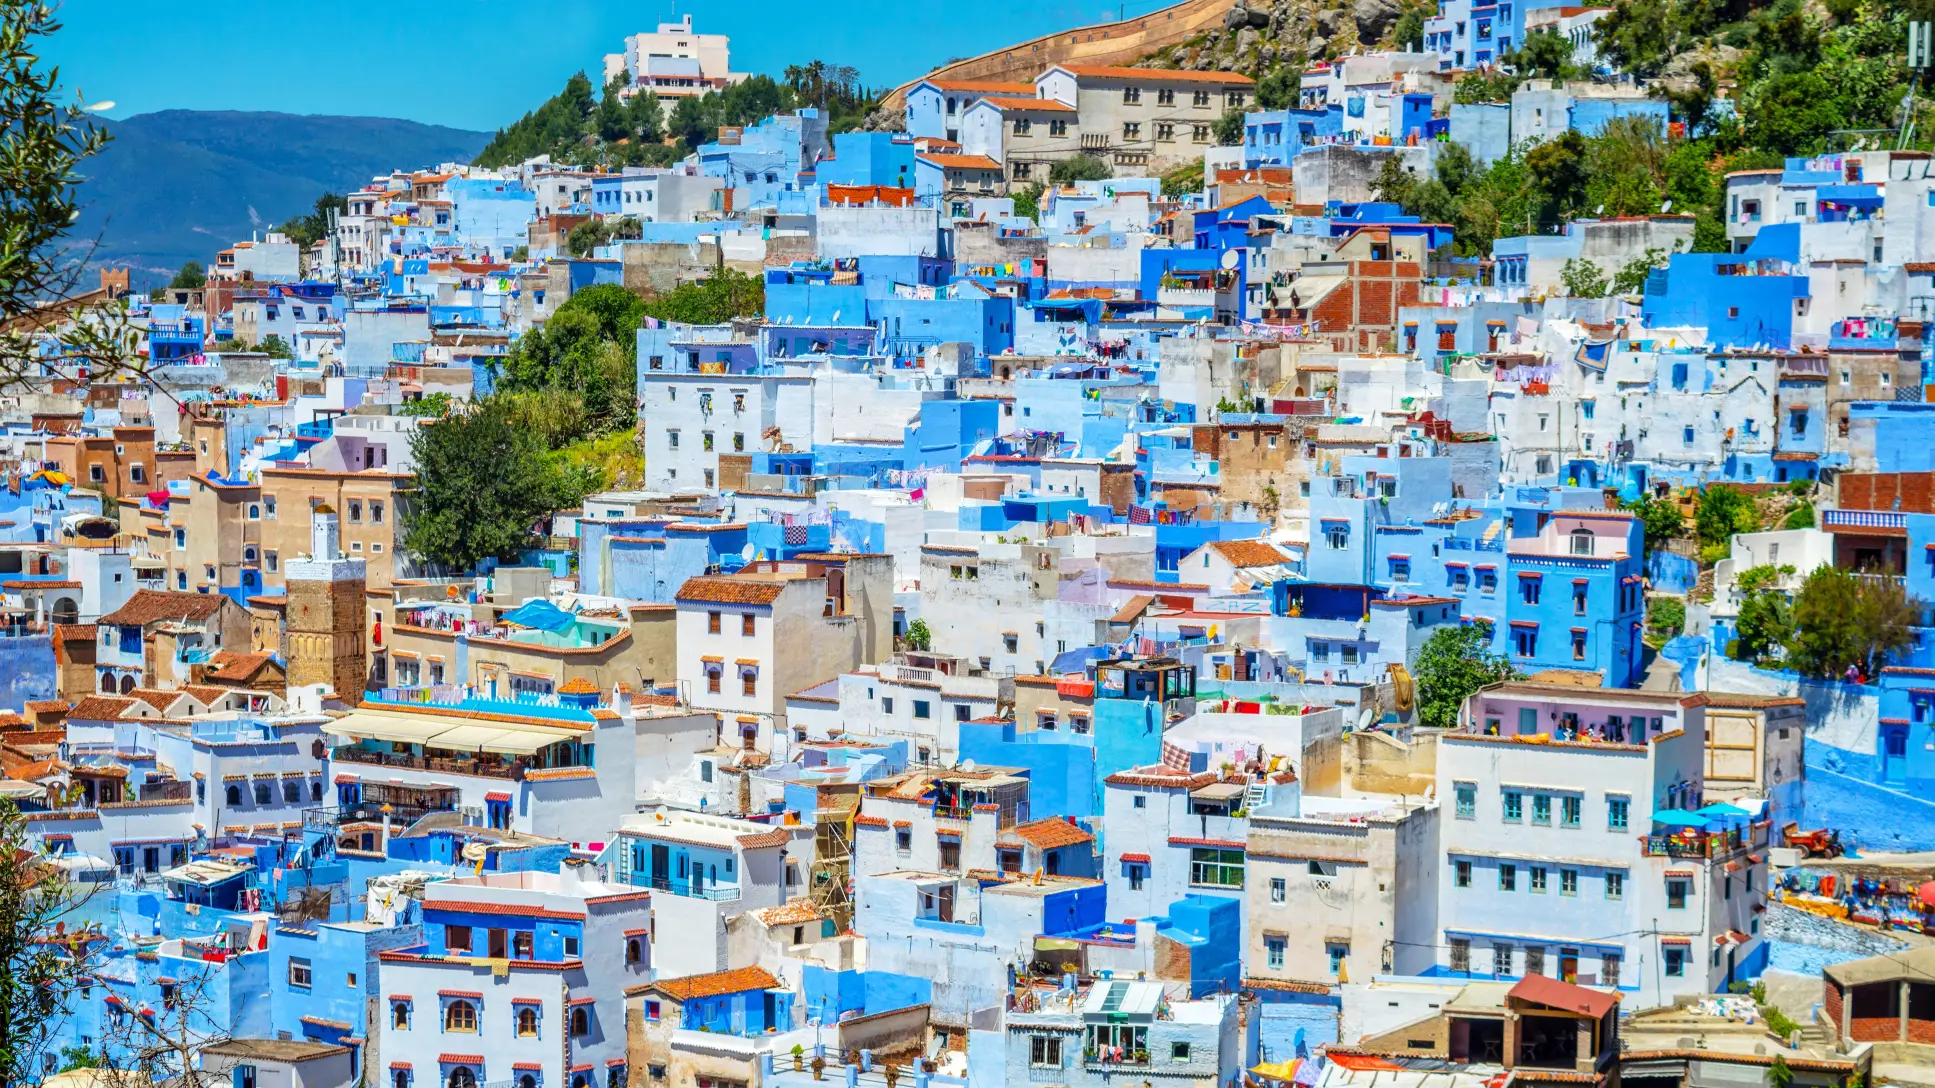 Chefchaouen the most colorful city in the world